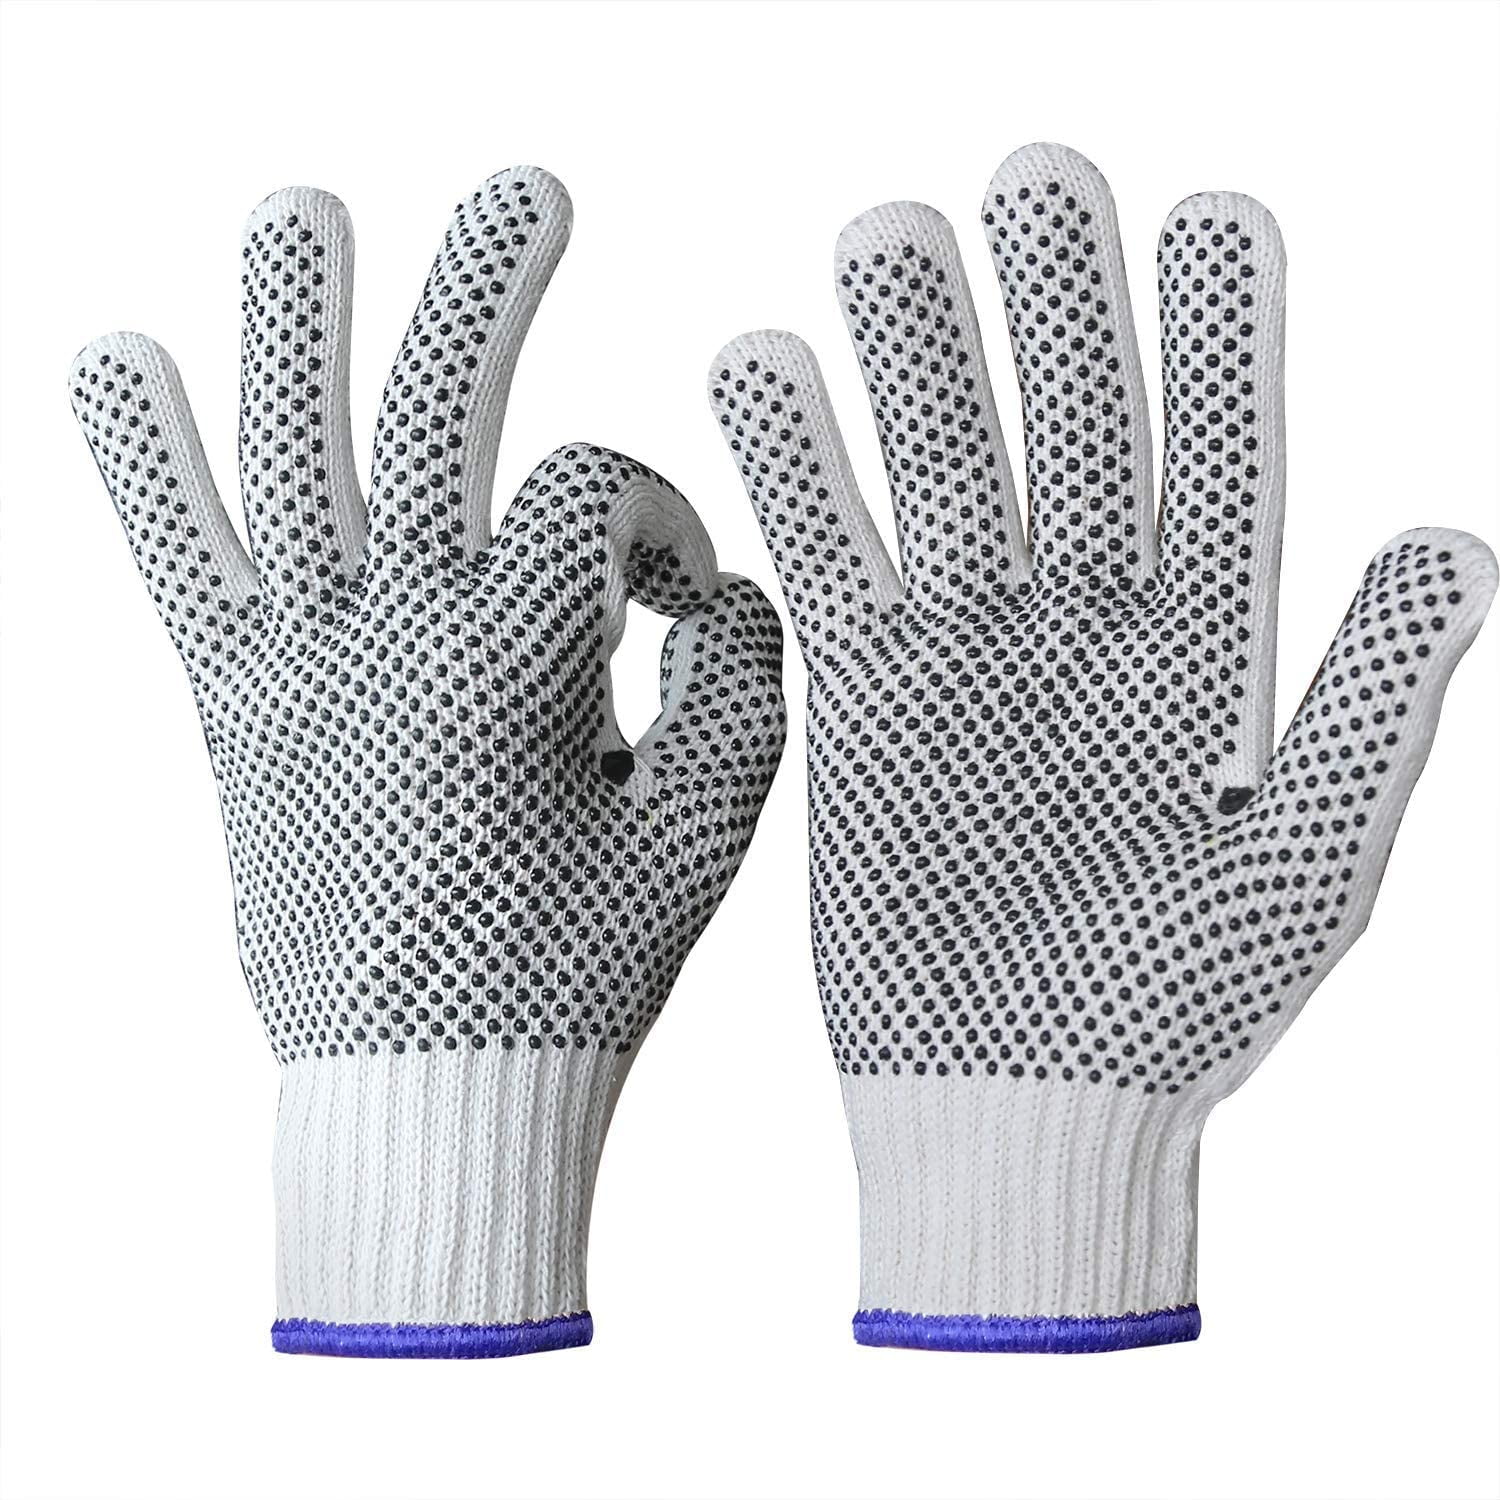 32/5000 [12 Pair] Cotton Yarn Knitted Protective Grip Painter Industrial  Warehouse Gardening Work Gloves for